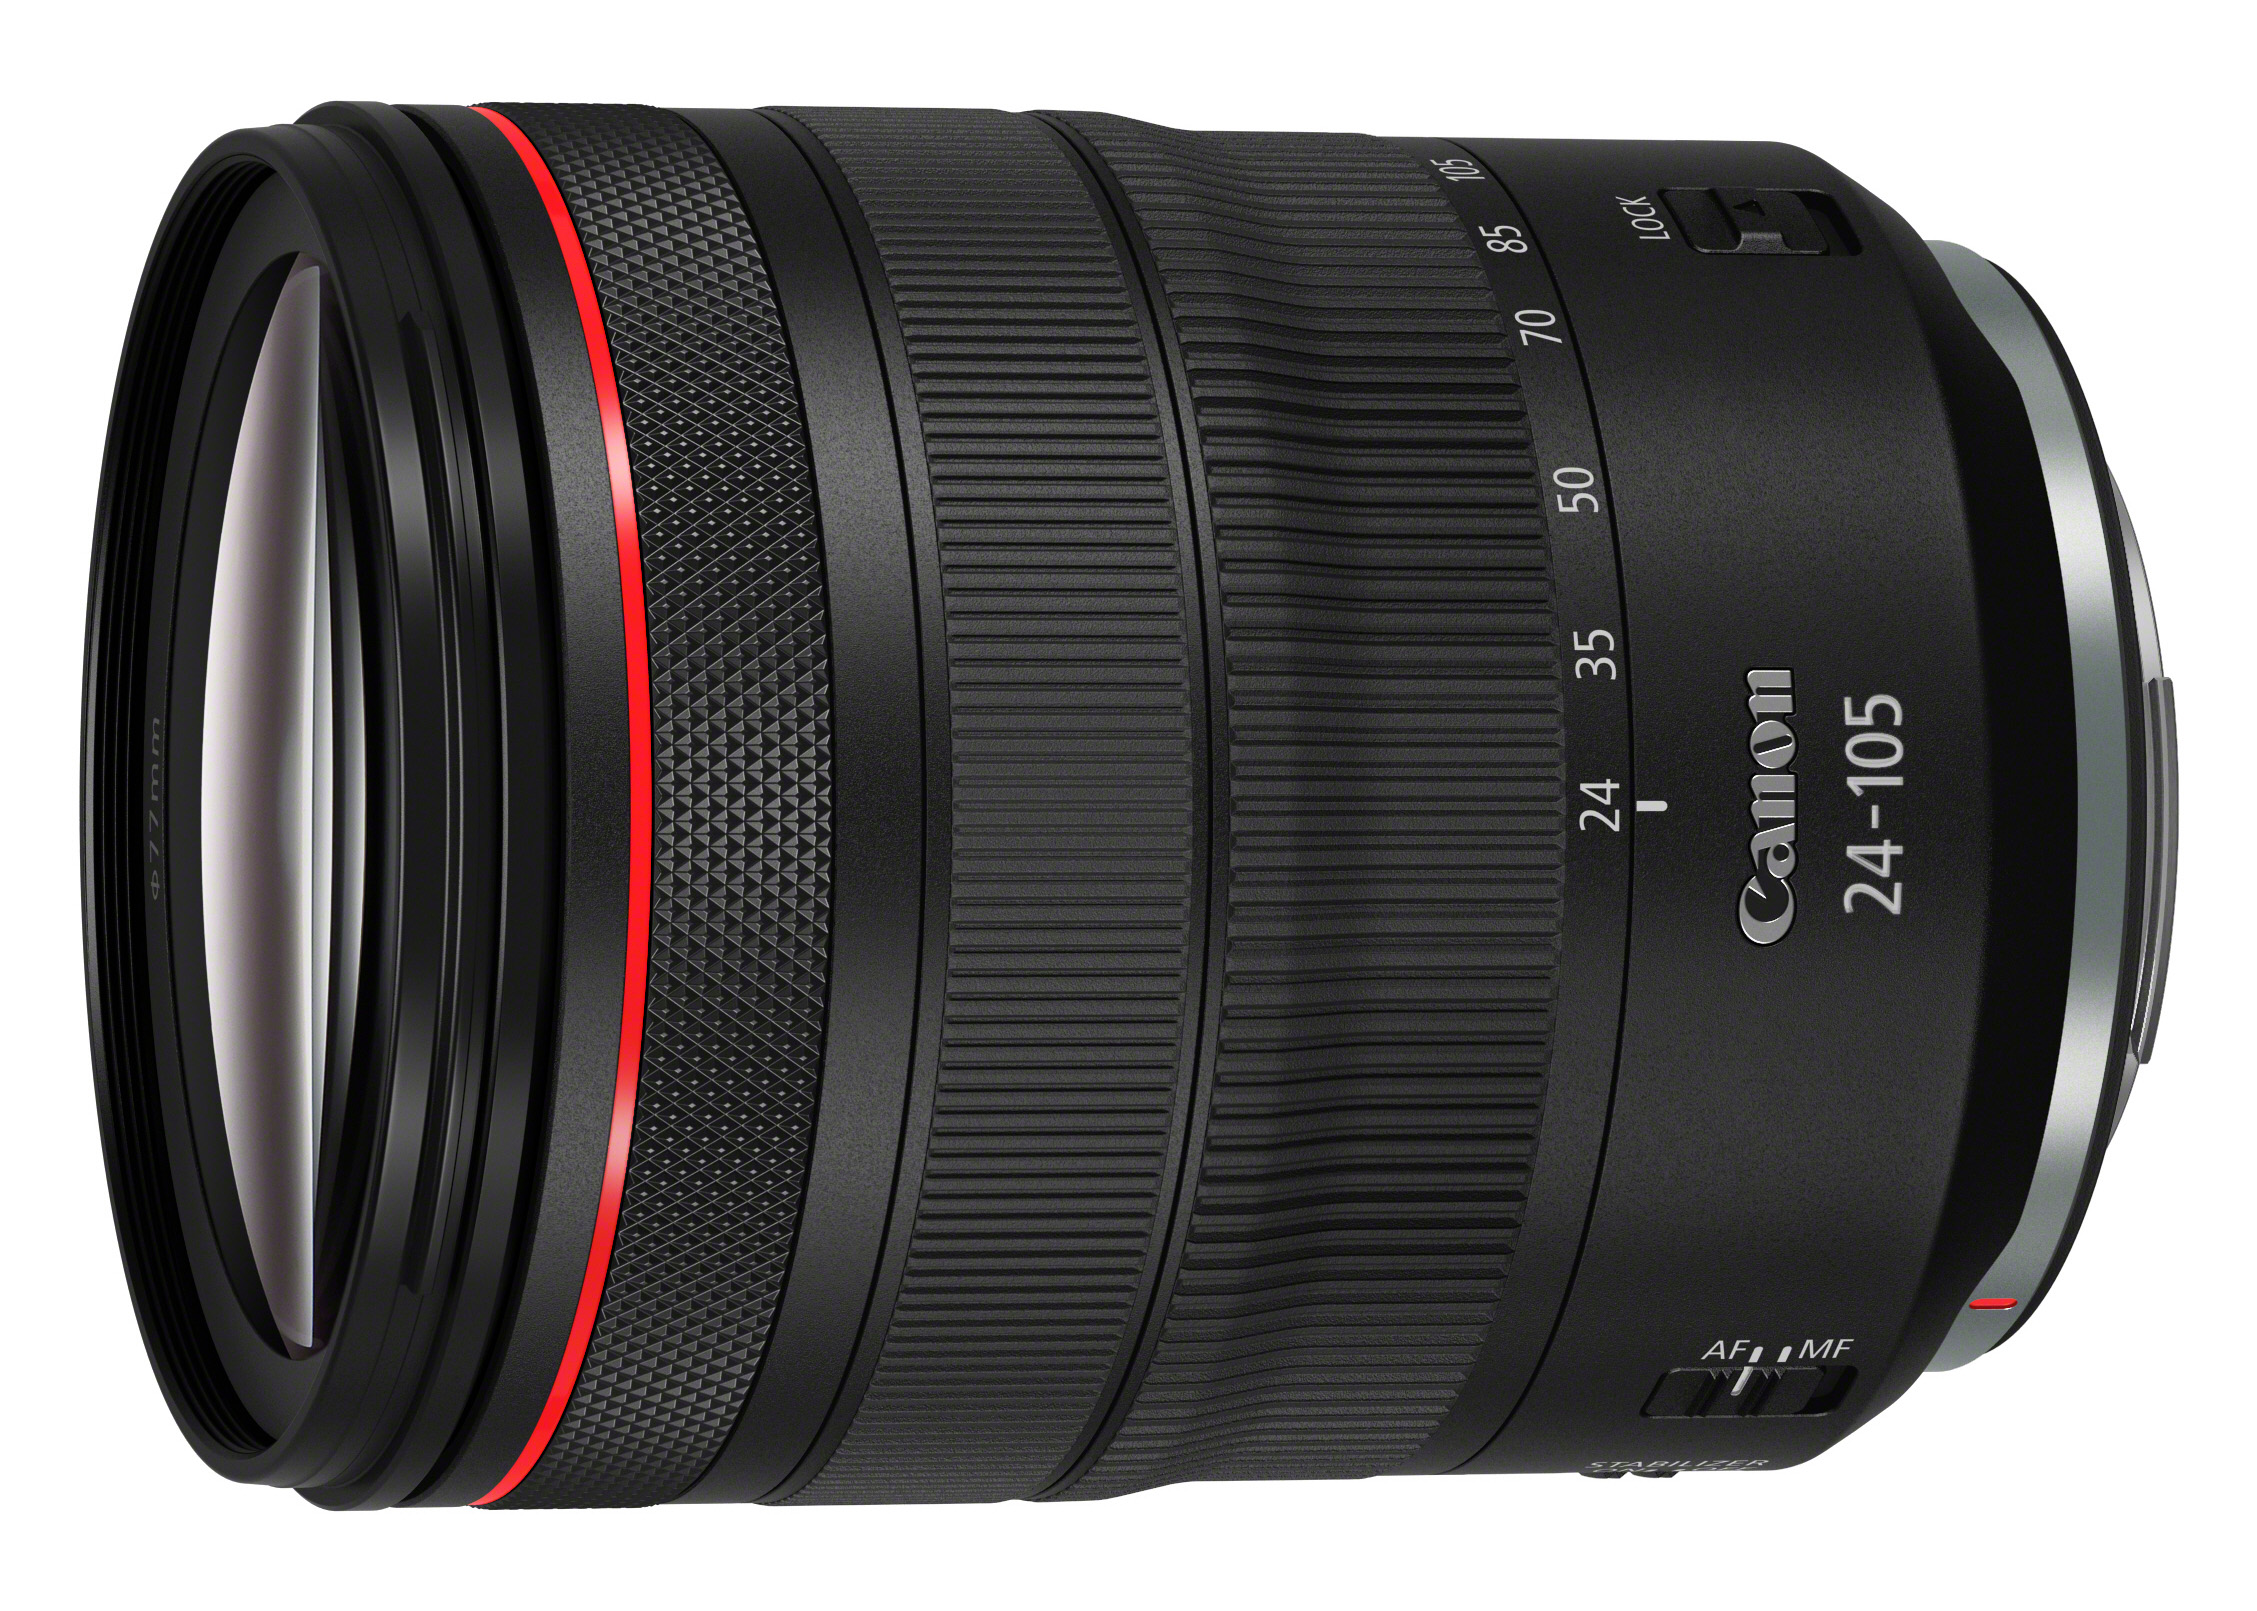 Canon RF 24-105 mm f/4 L IS USM 